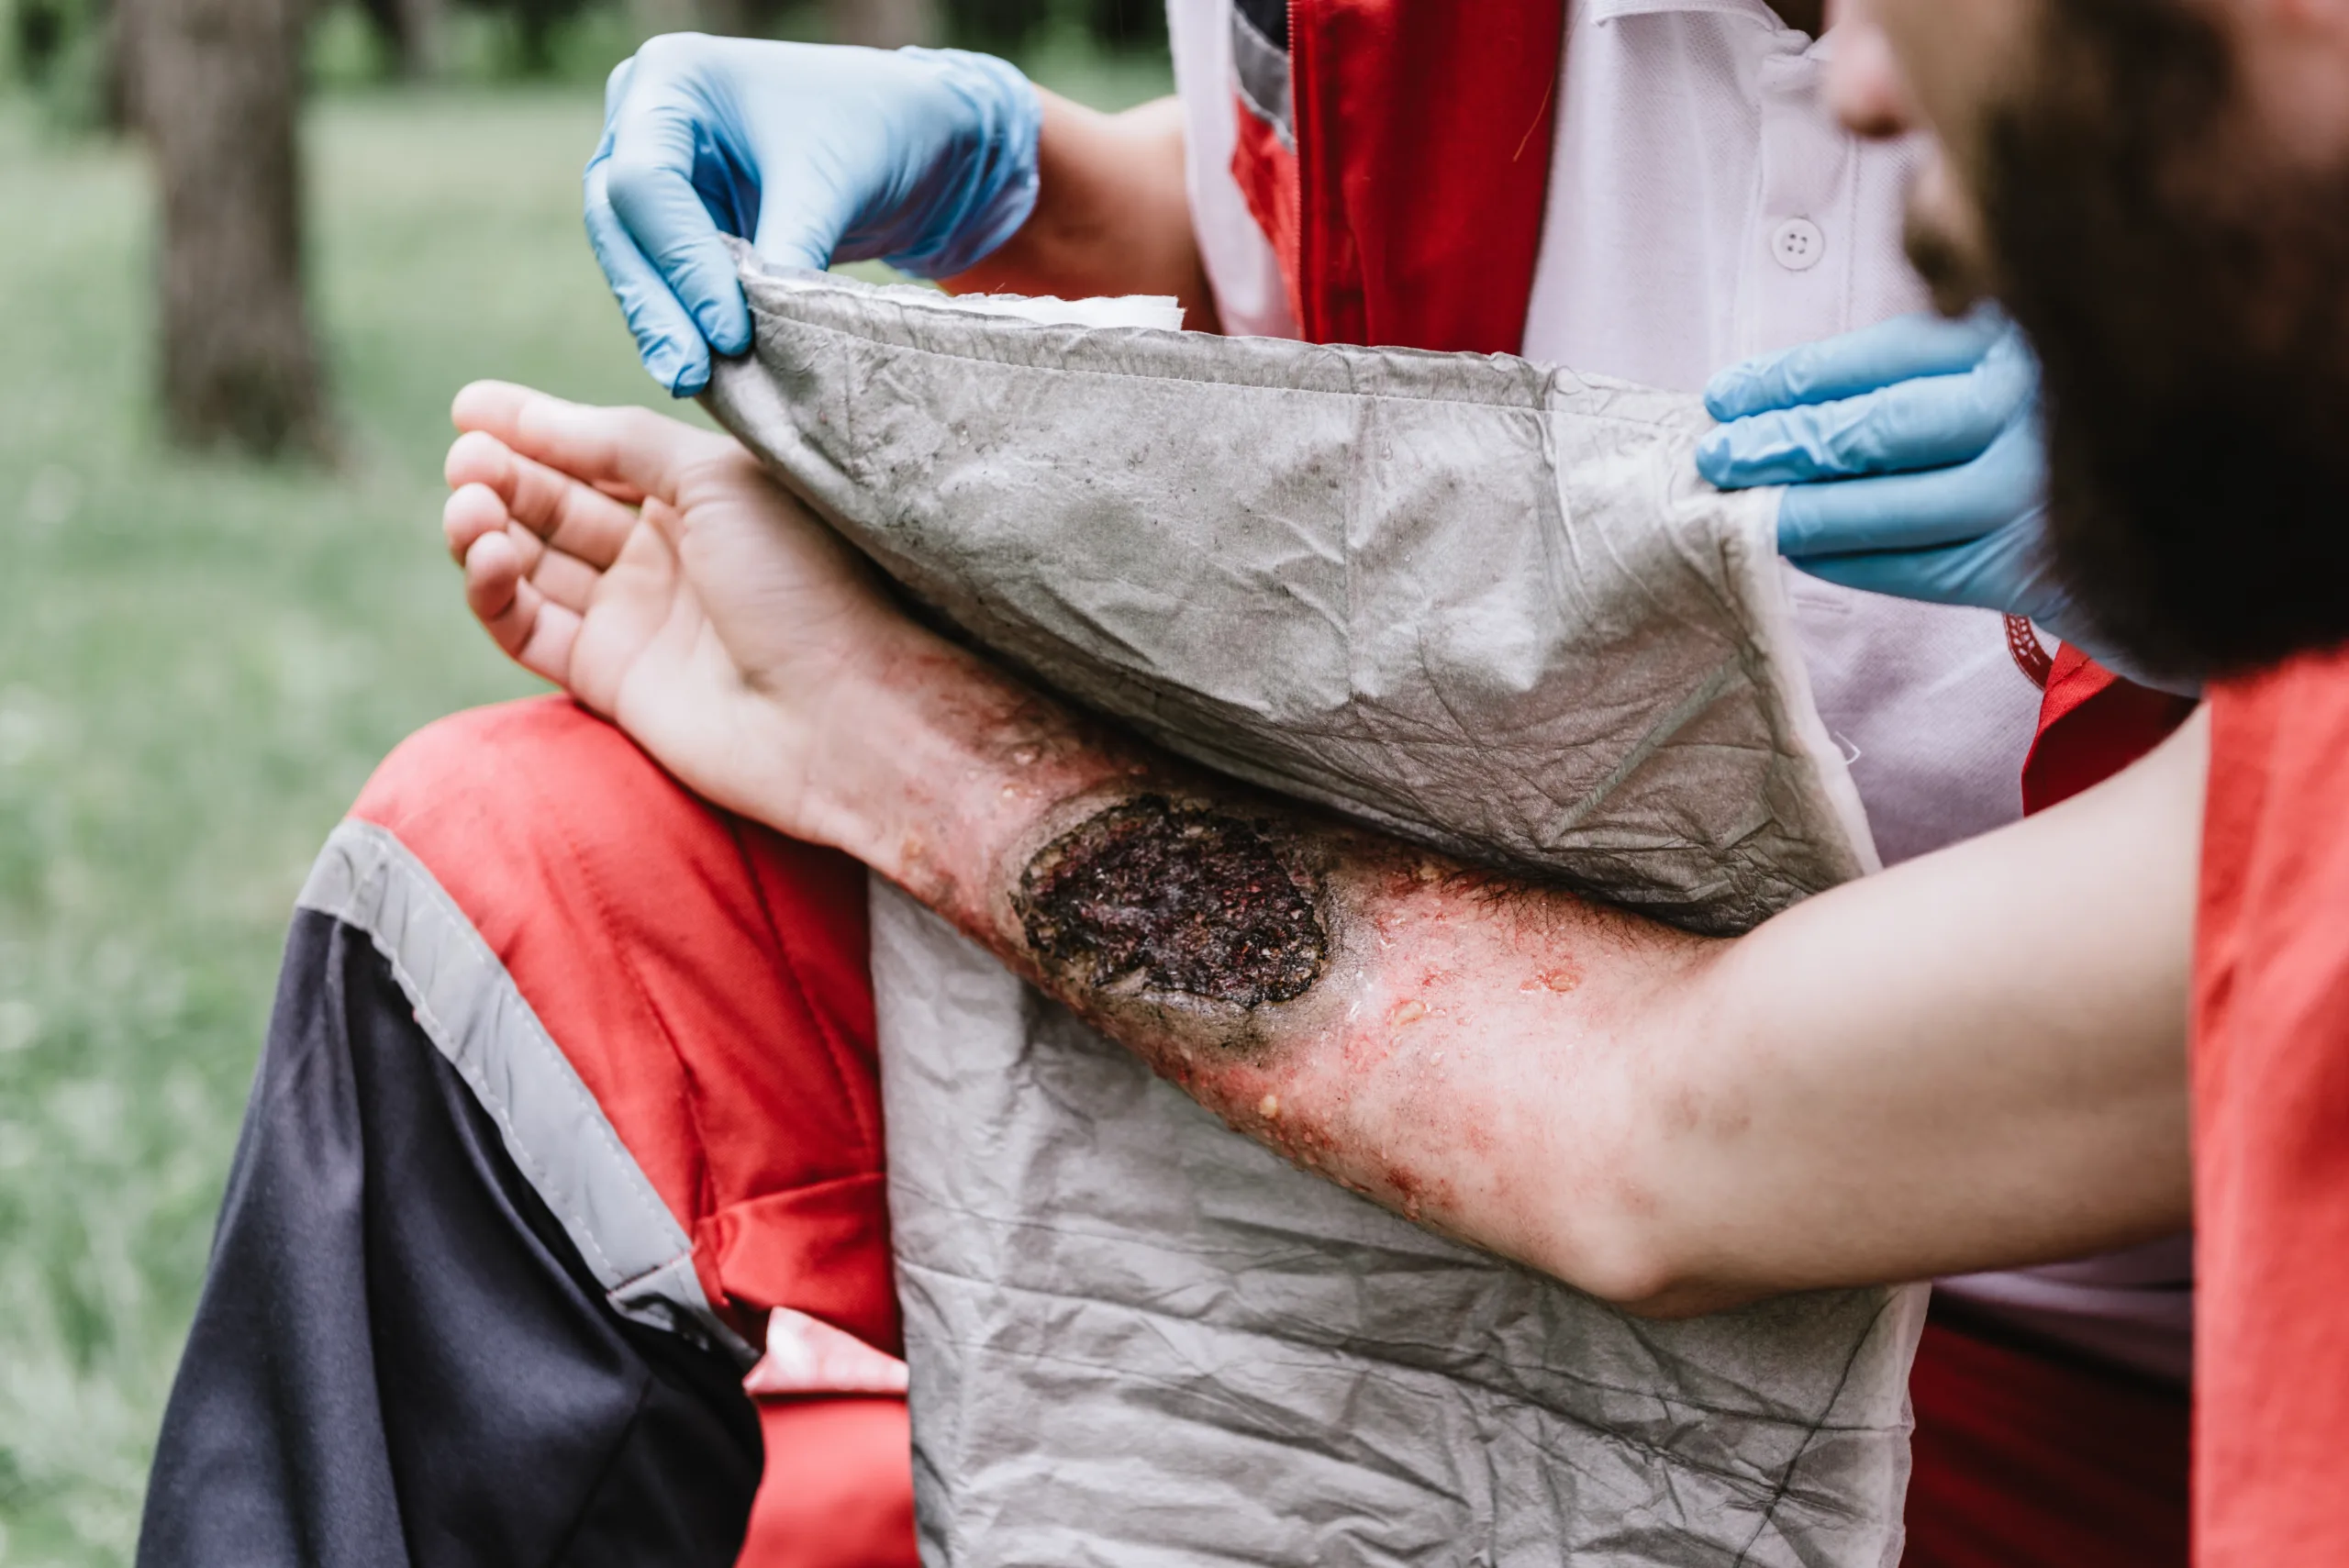 First aid paramedic in training, treating necrosis from krokodil